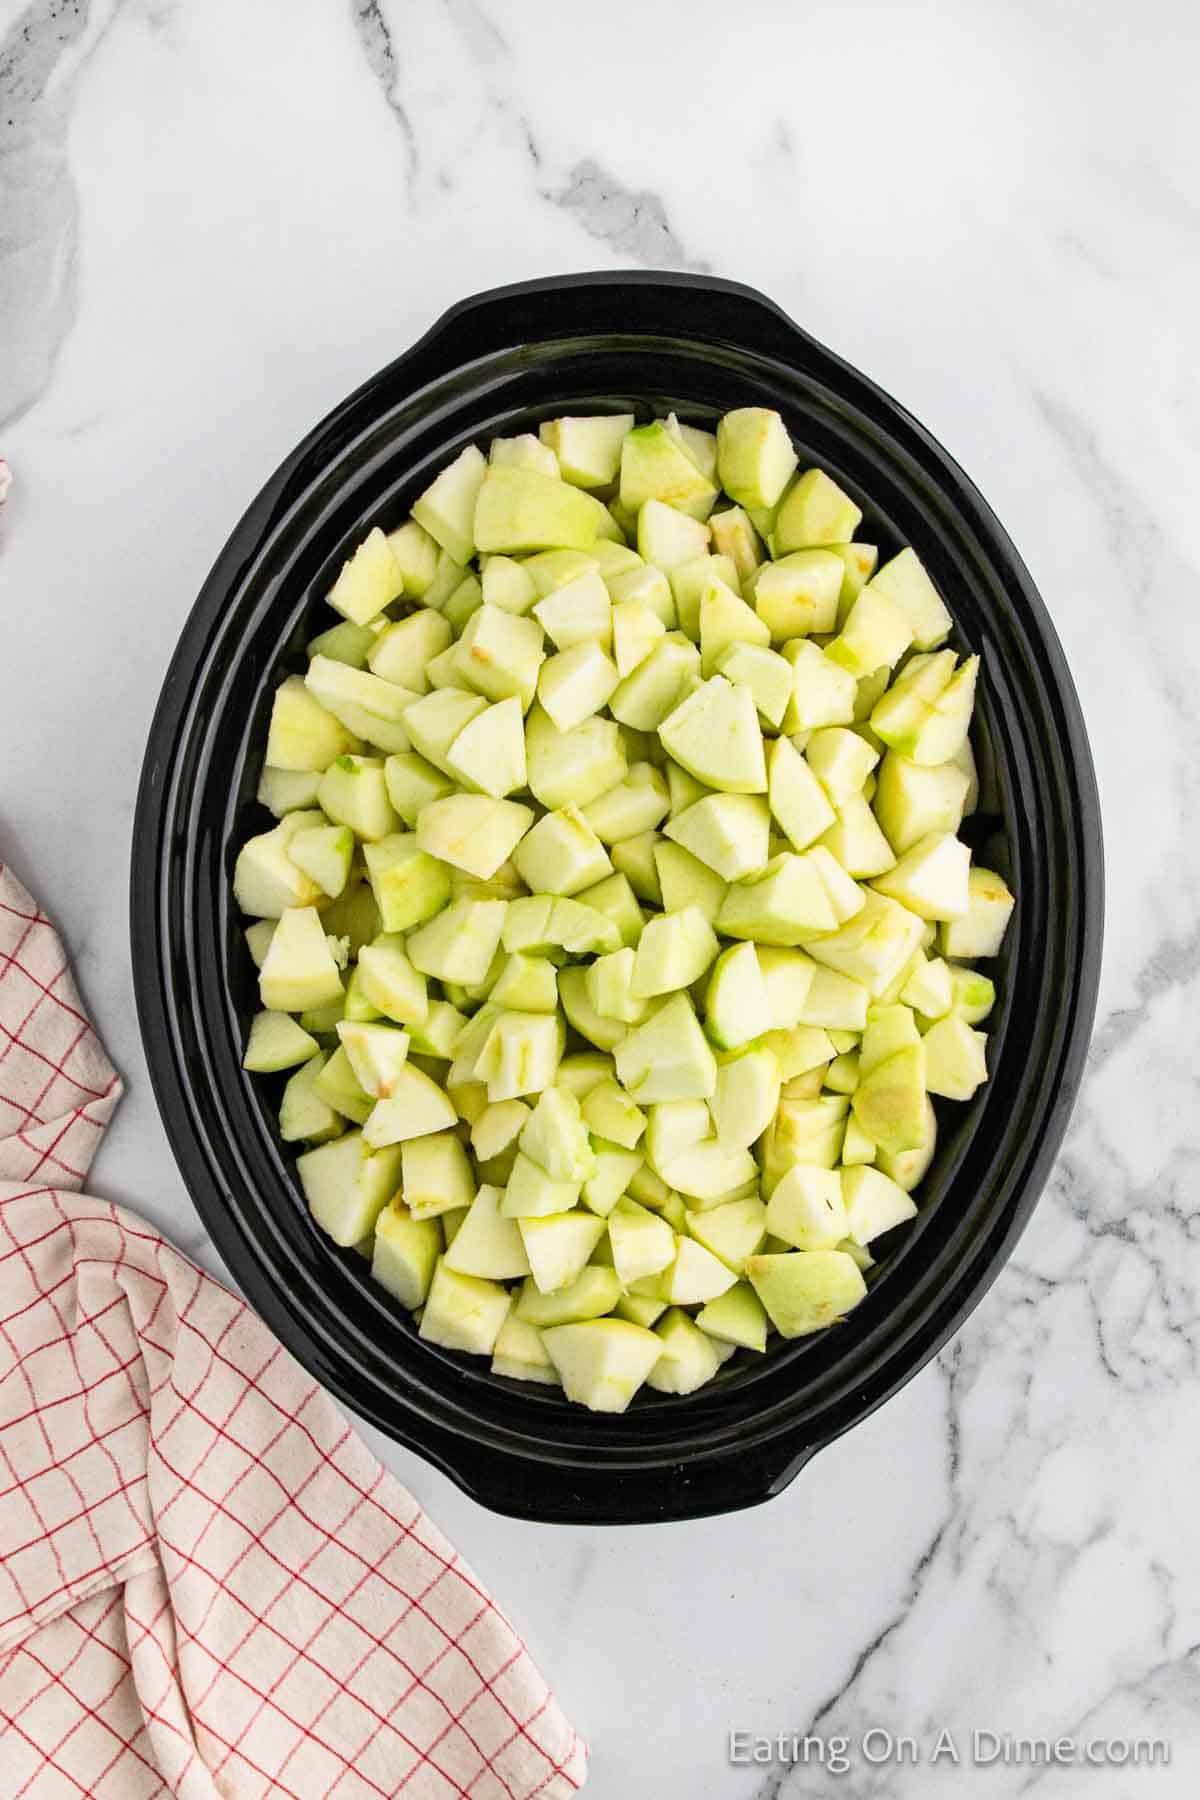 Placing diced apples in the crock pot